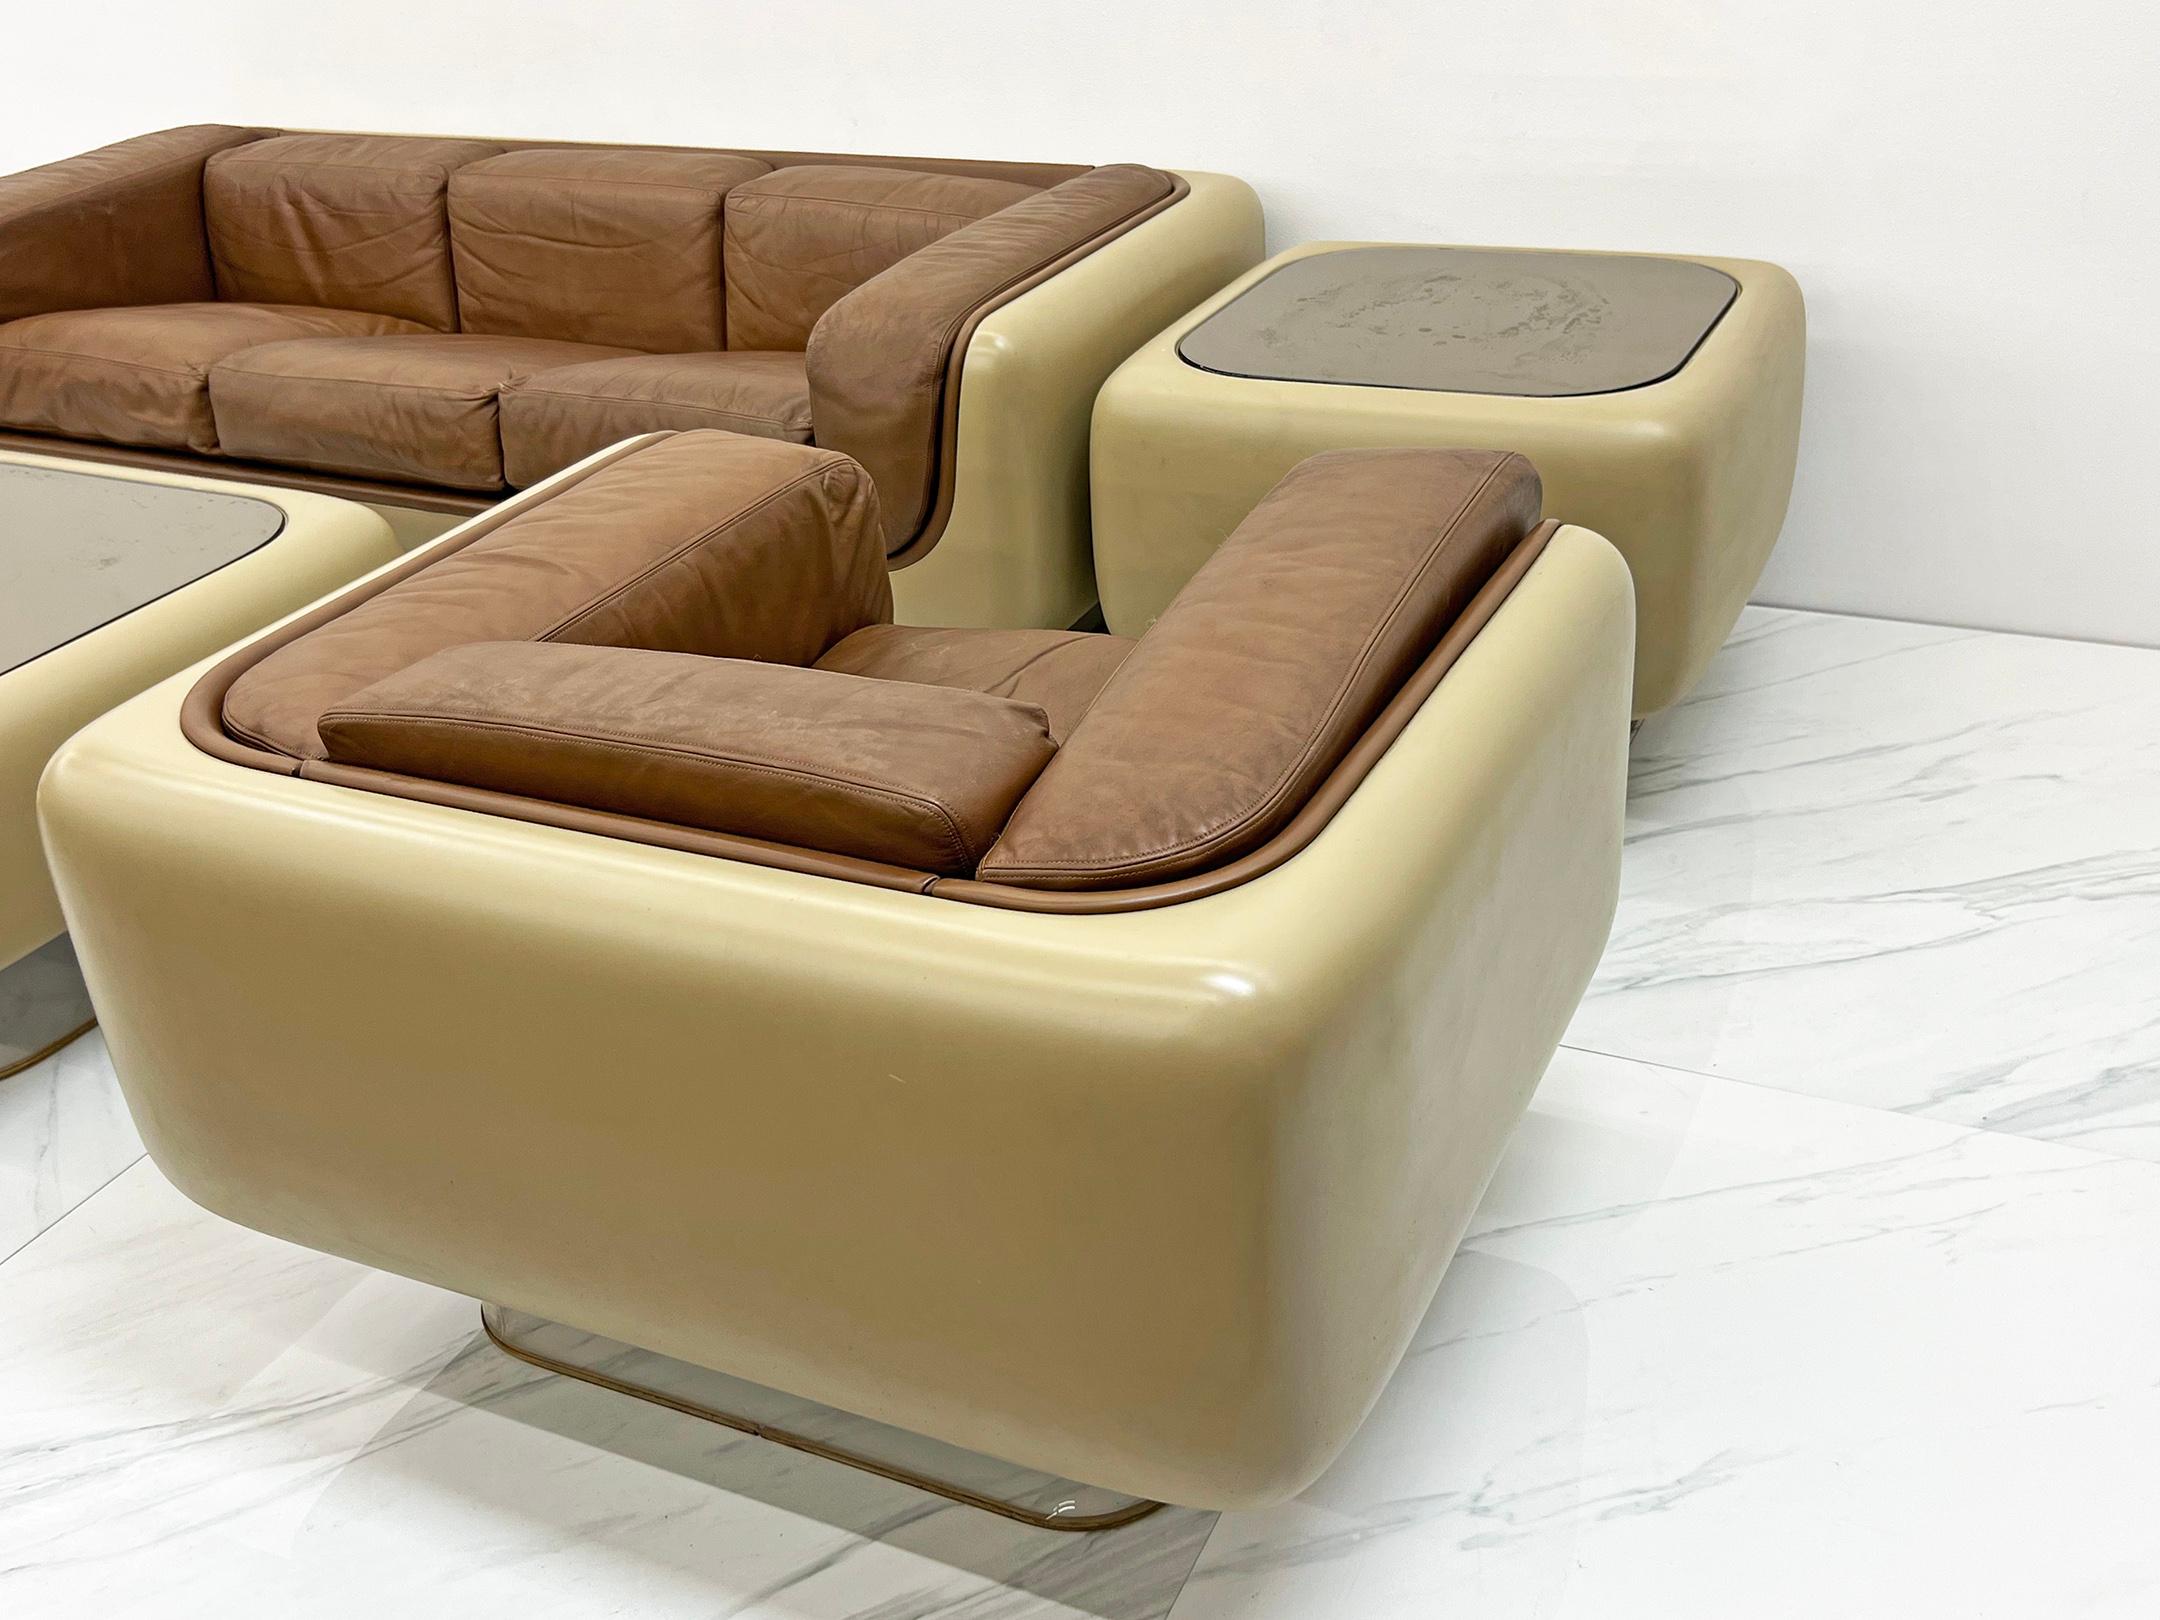 American William Andrus for Steelcase Space Age, Sofa, Chair, Living Room Suite, 1970's